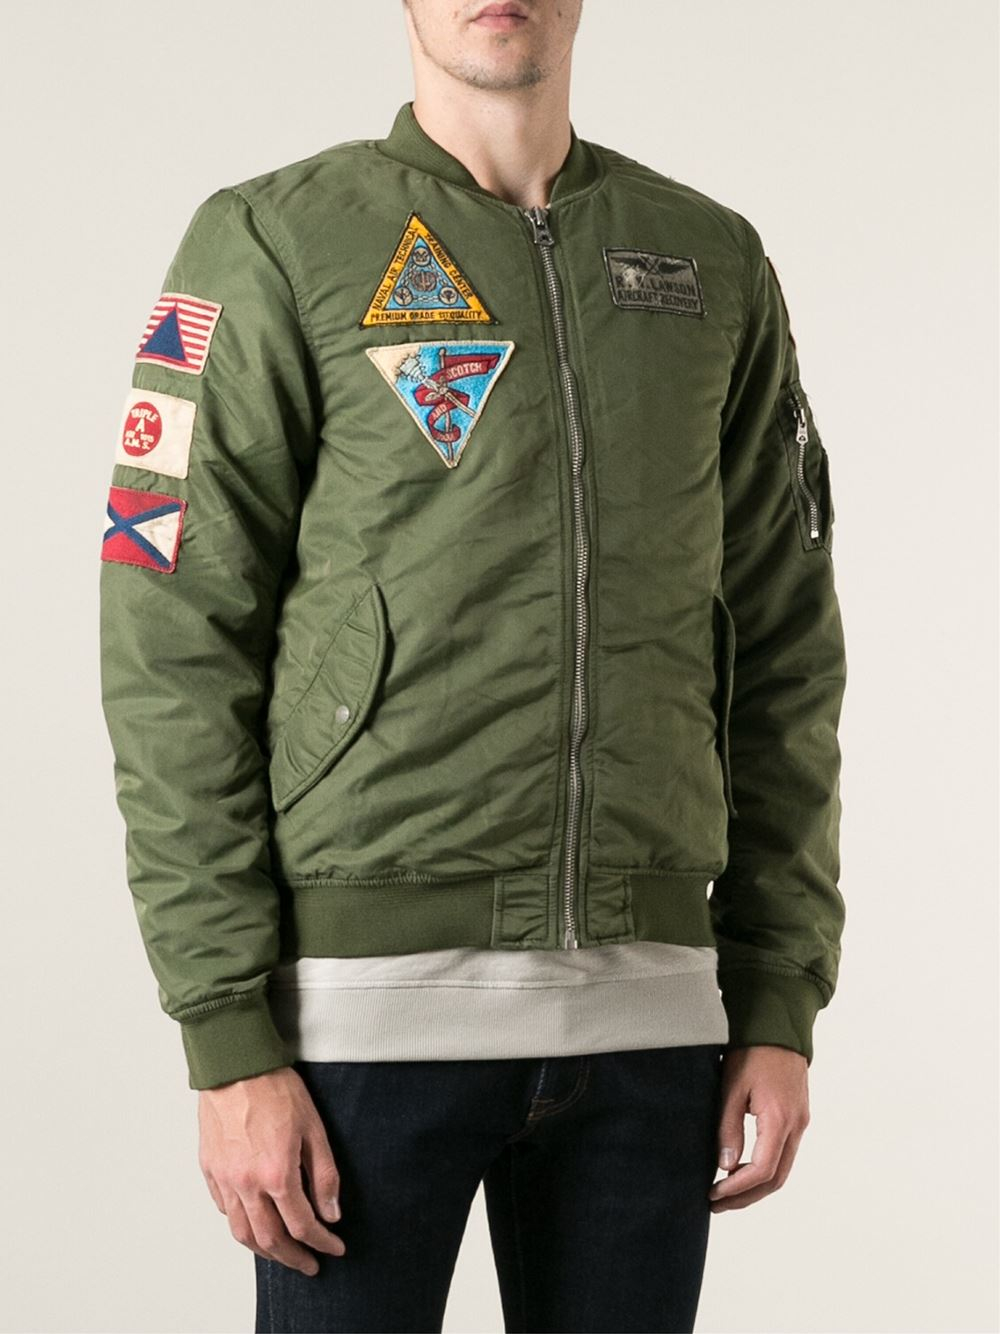 Scotch & Soda Military Style Patched Jacket in Green for Men - Lyst